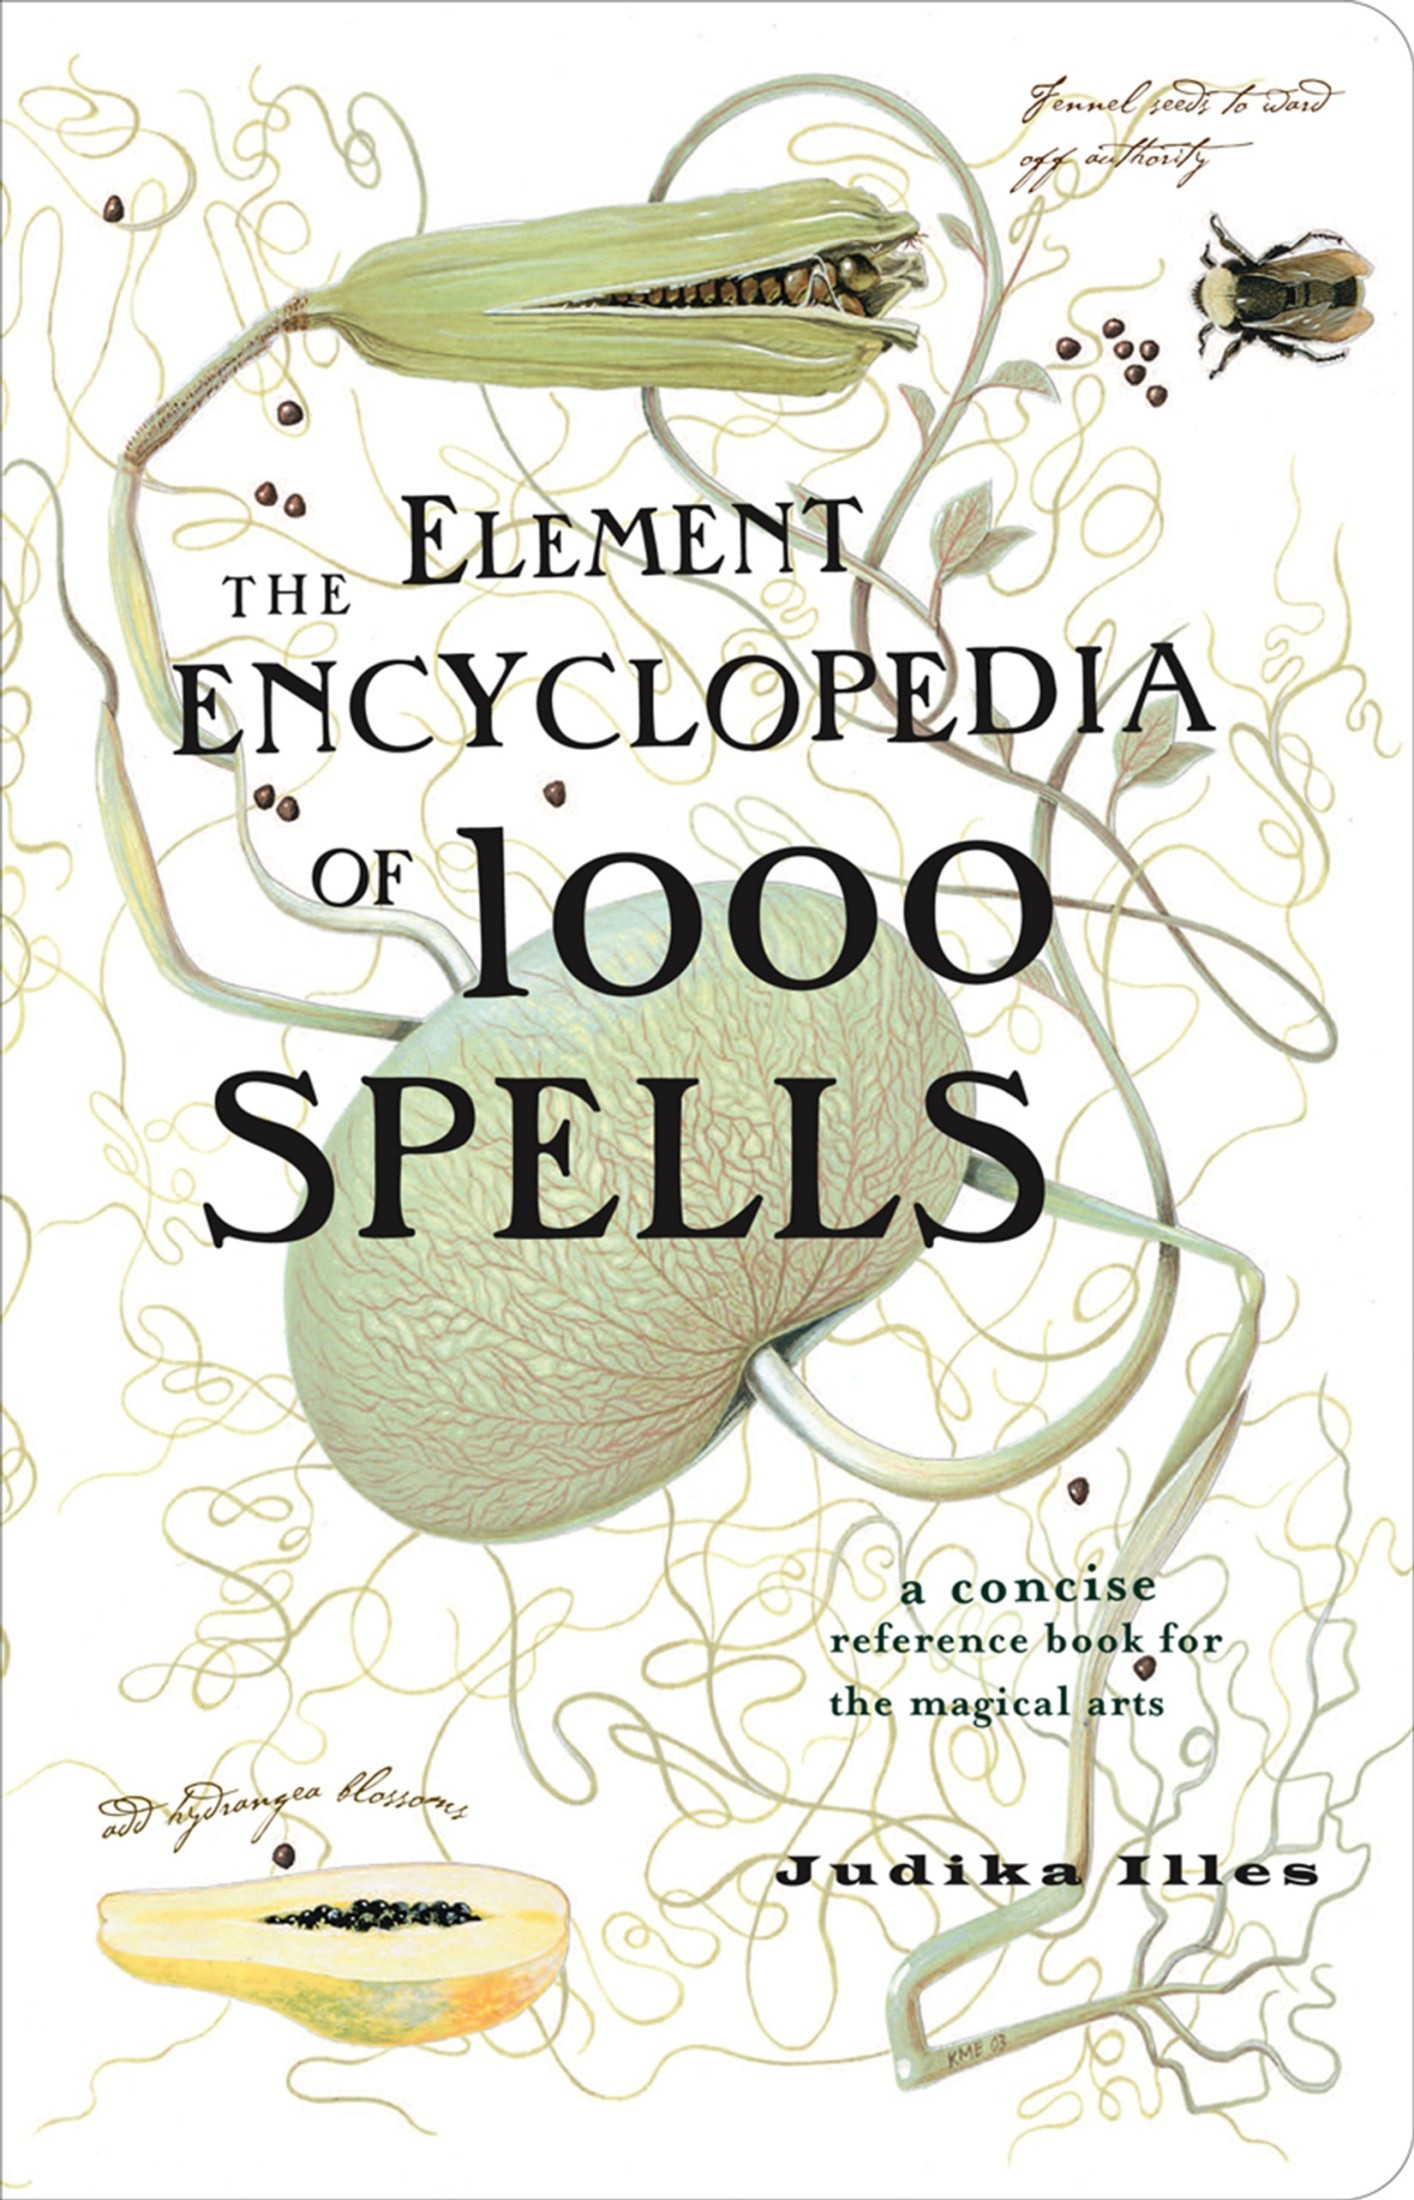 The Element Encyclopedia of 1000 Spells: A Concise Reference Book for the Magical Arts